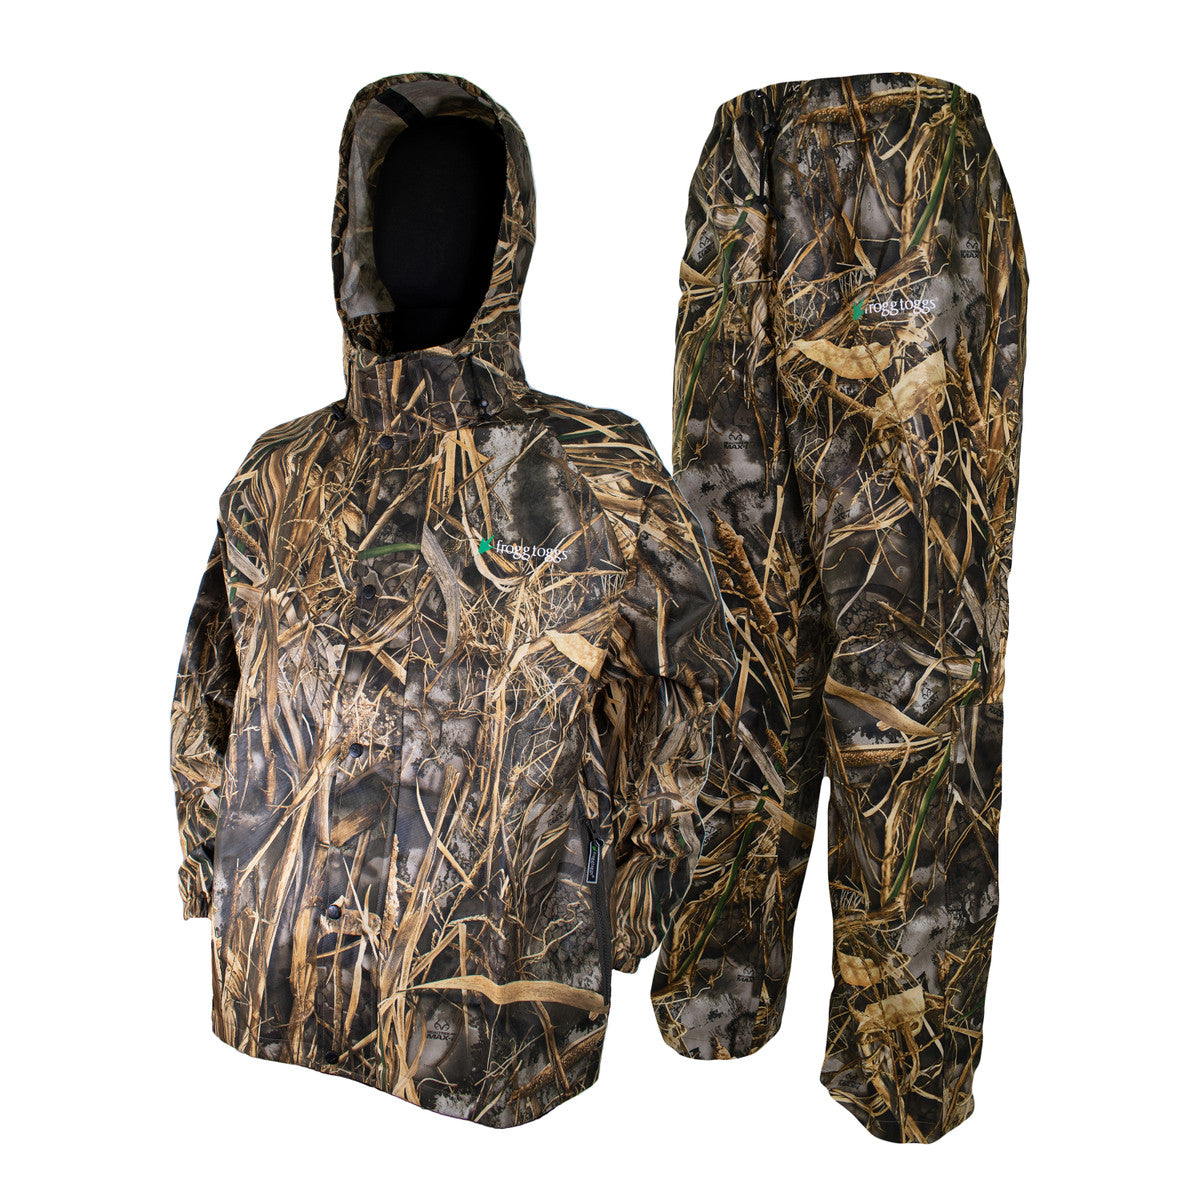 FROGG TOGGS MENS CLASSIC ALL-SPORT RAIN SUIT REALTREE MAX-7 SIZE 2XL